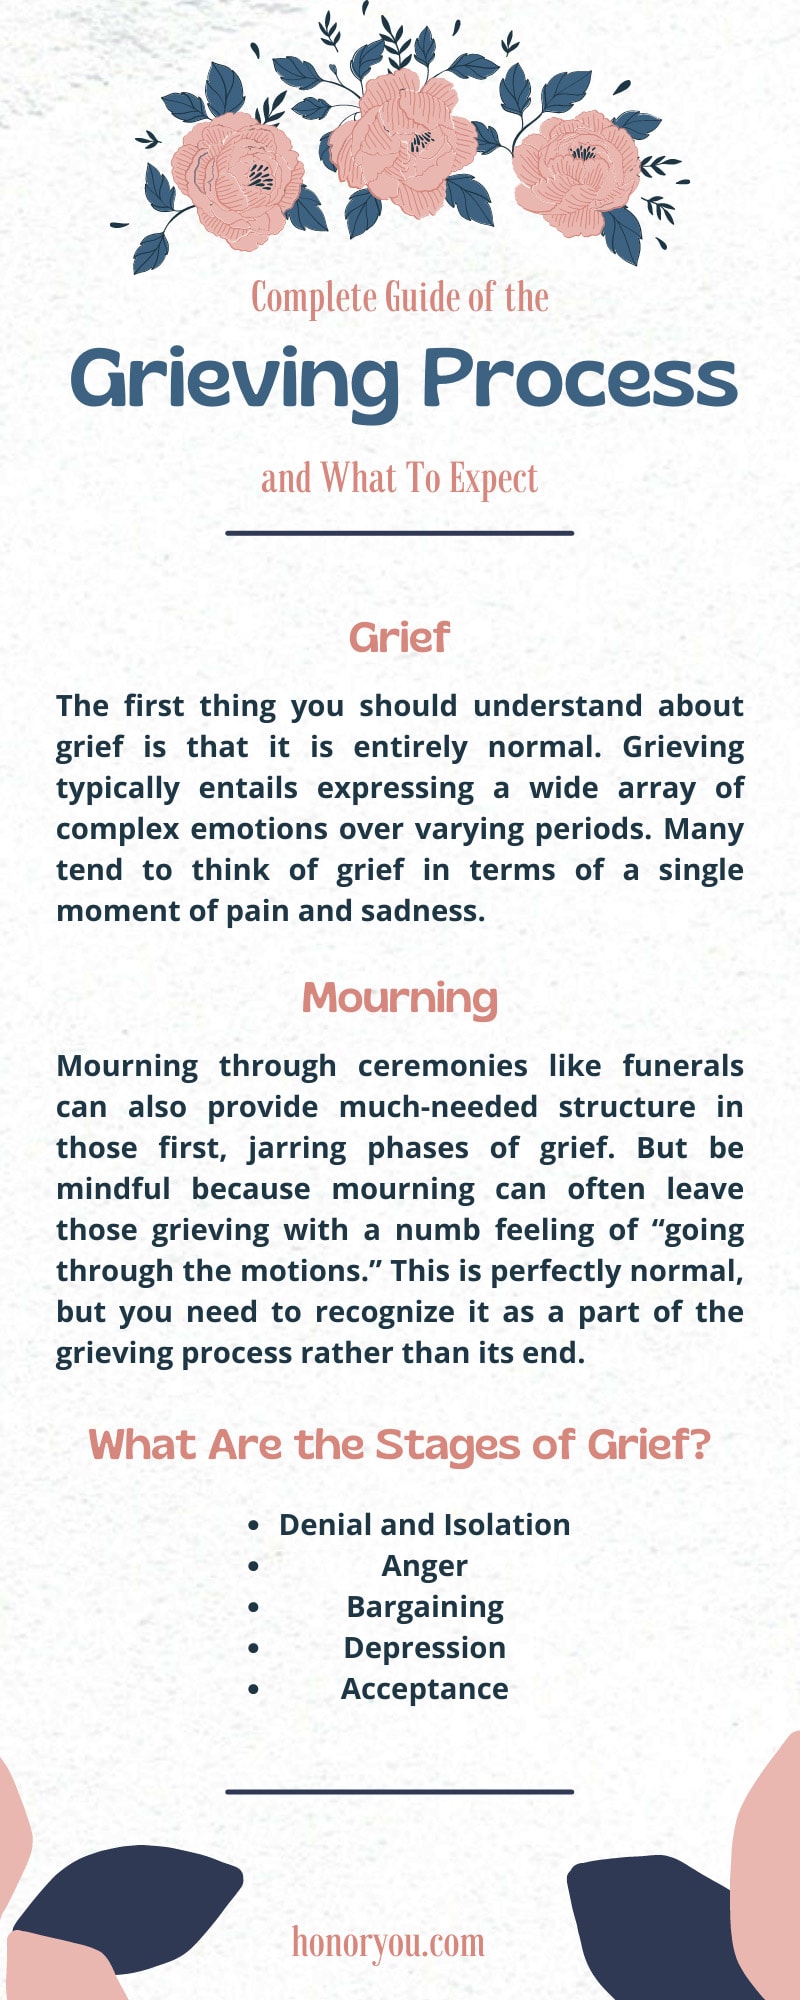 Complete Guide of the Grieving Process and What To Expect